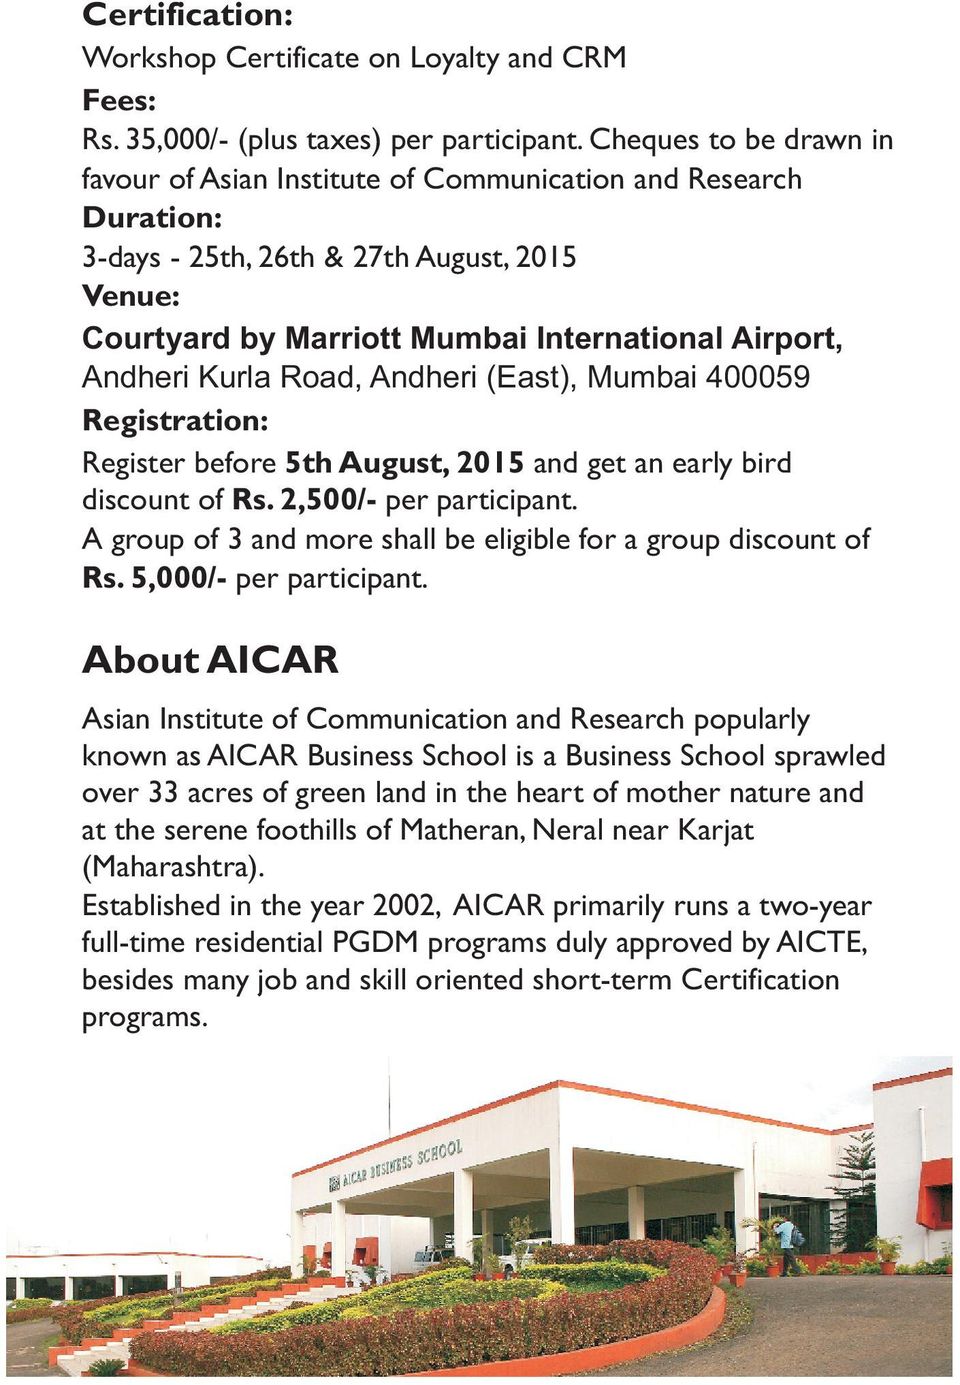 Kurla Road, Andheri (East), Mumbai 400059 Registration: Register before 5th August, 2015 and get an early bird discount of Rs. 2,500/- per participant.